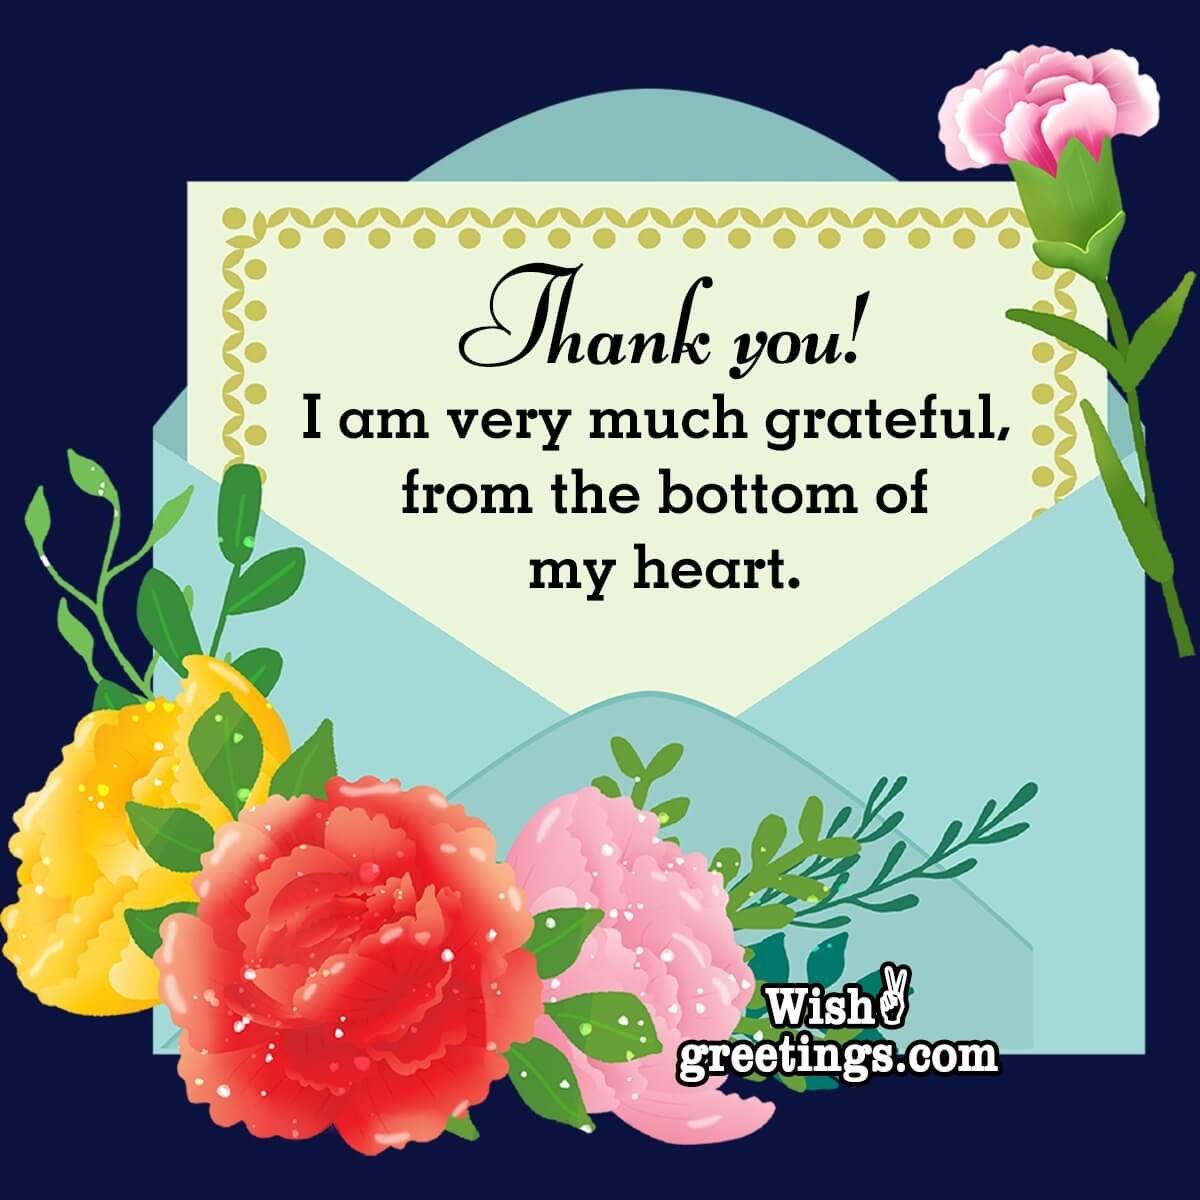 Thank You Card Messages - Wish Greetings